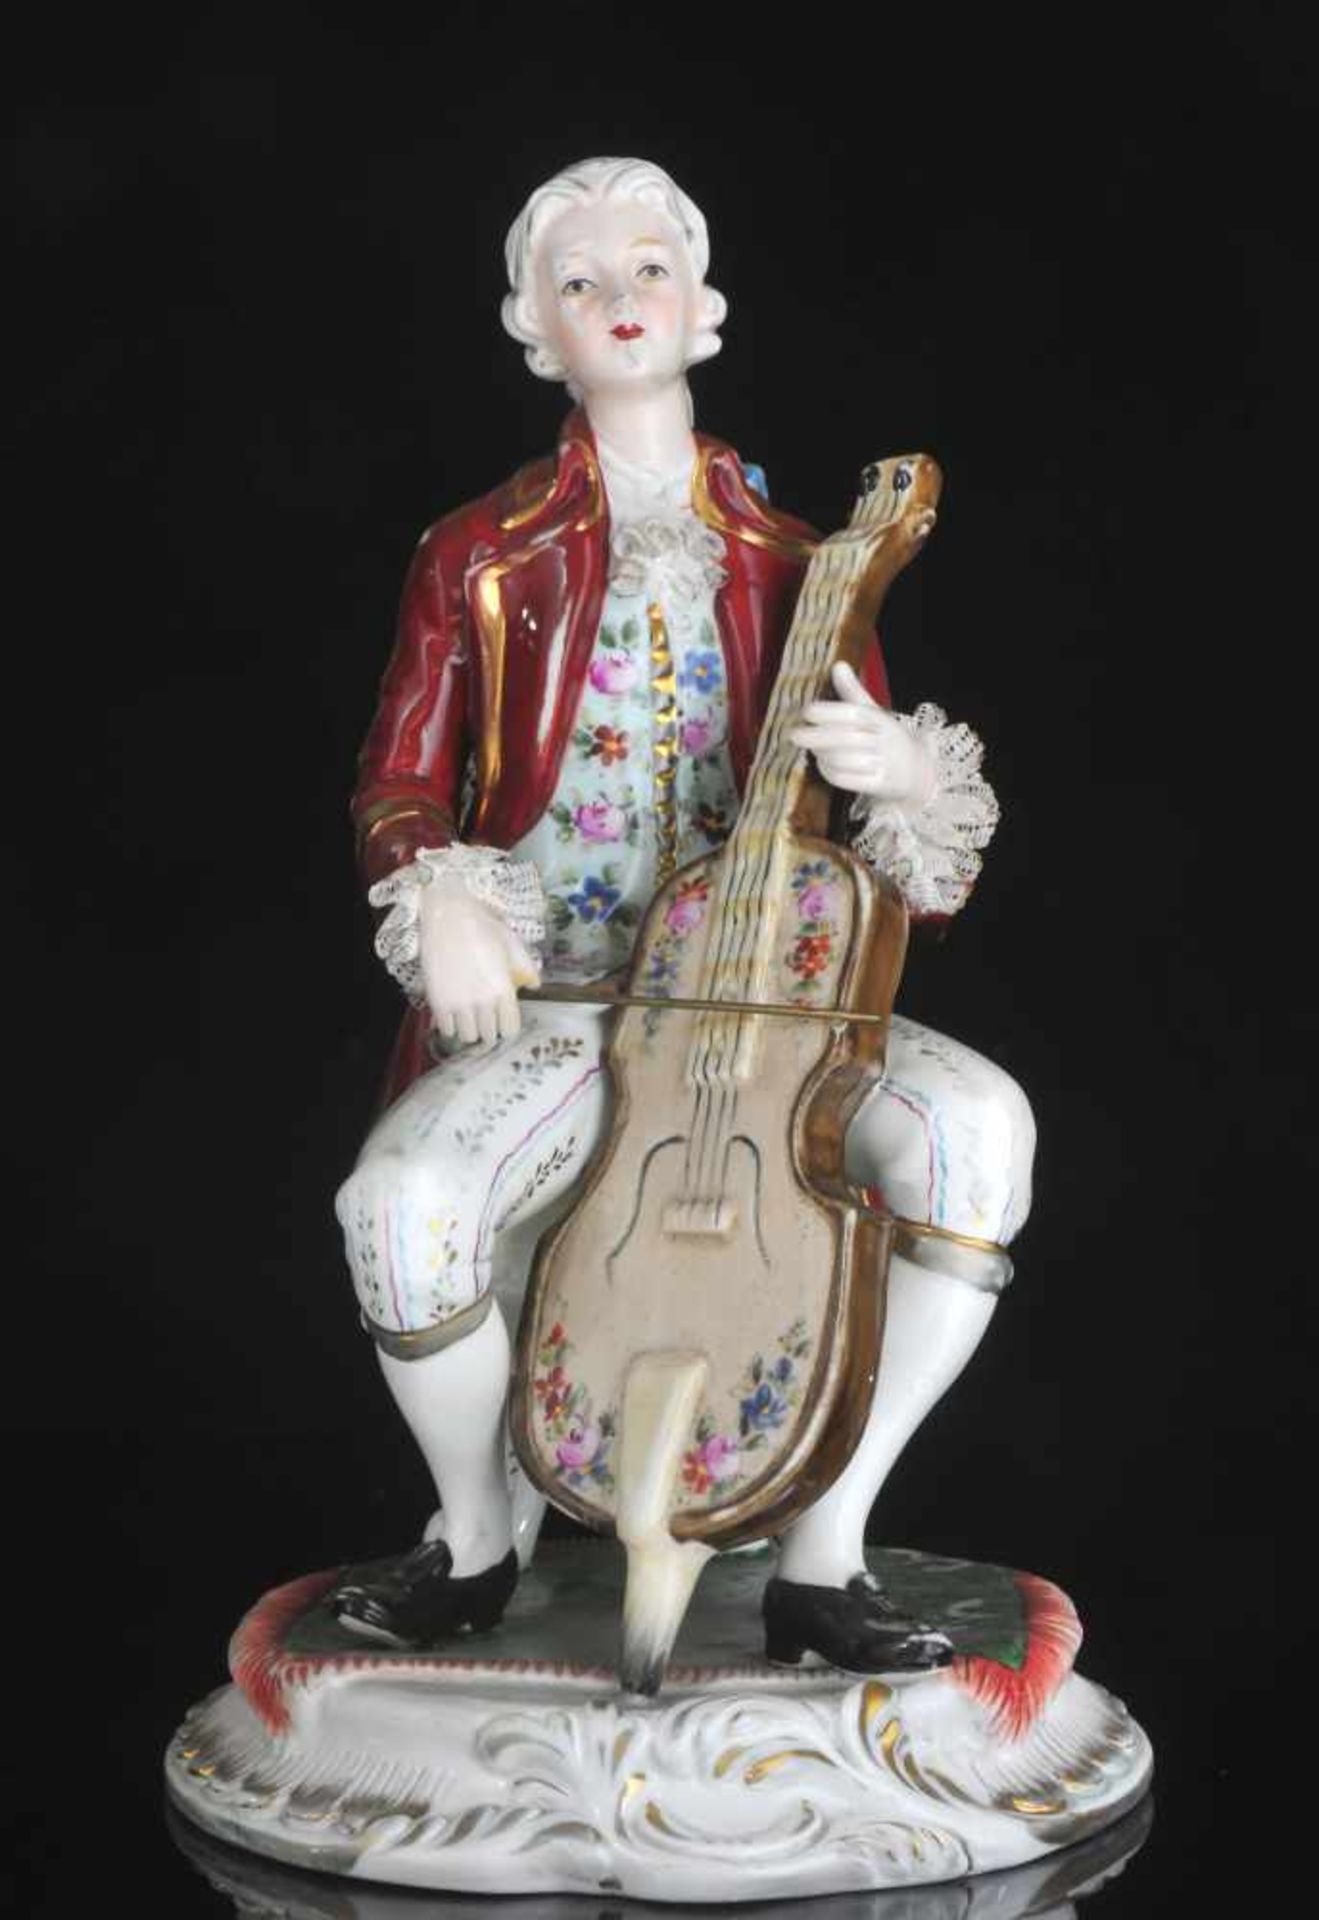 A PORCELAIN FIGURE - CELLIST, GERMANY LATE 19TH / EARLY 20TH CENTURYOrigin: Germany, late 19th to